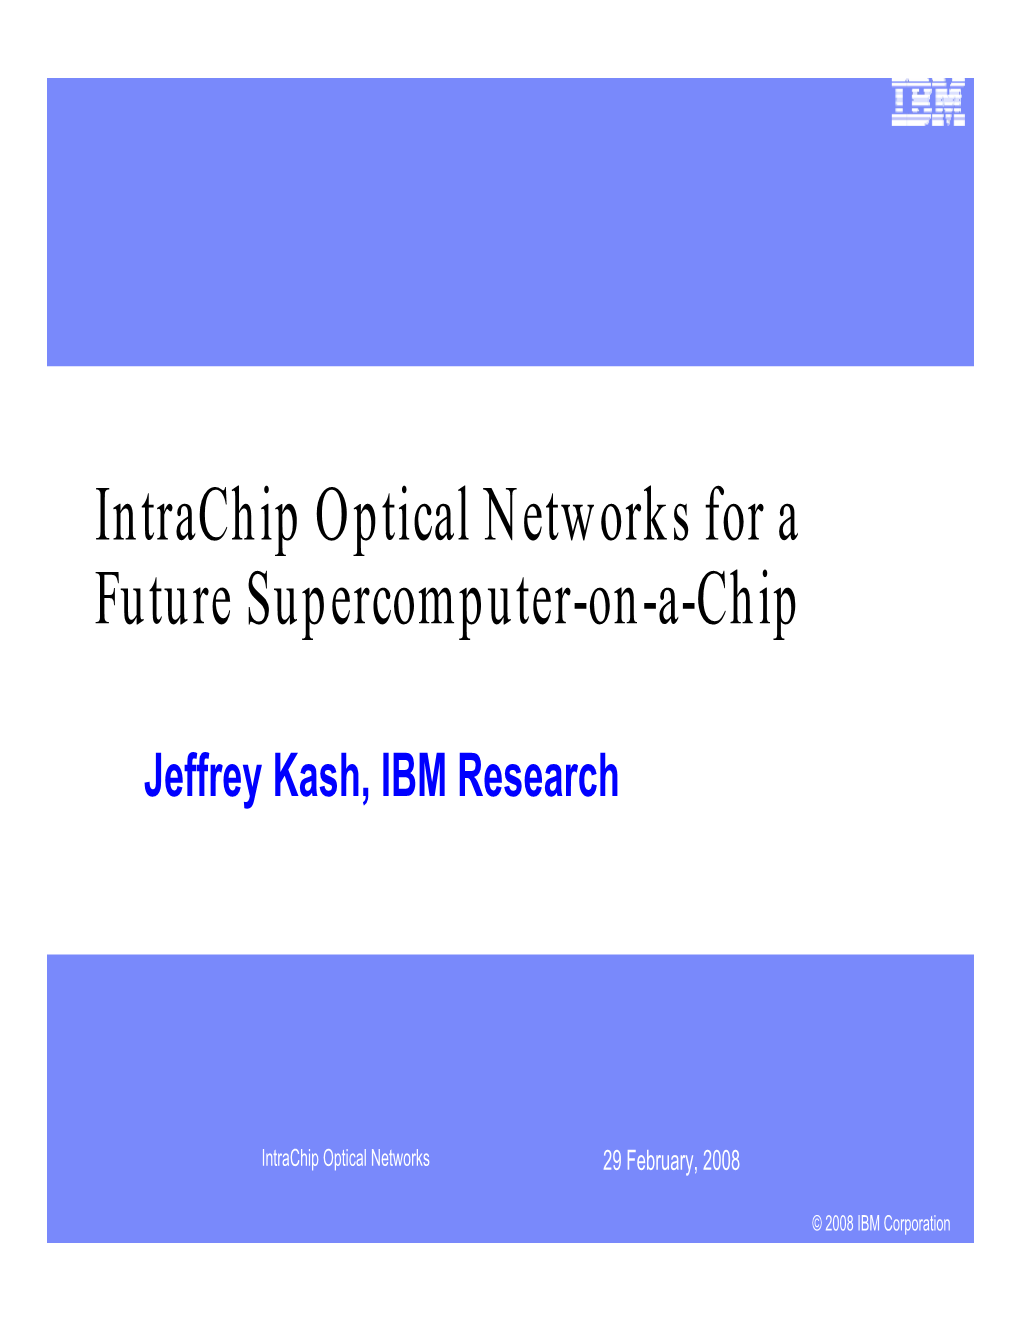 Intrachip Optical Networks for a Future Supercomputer-On-A-Chip